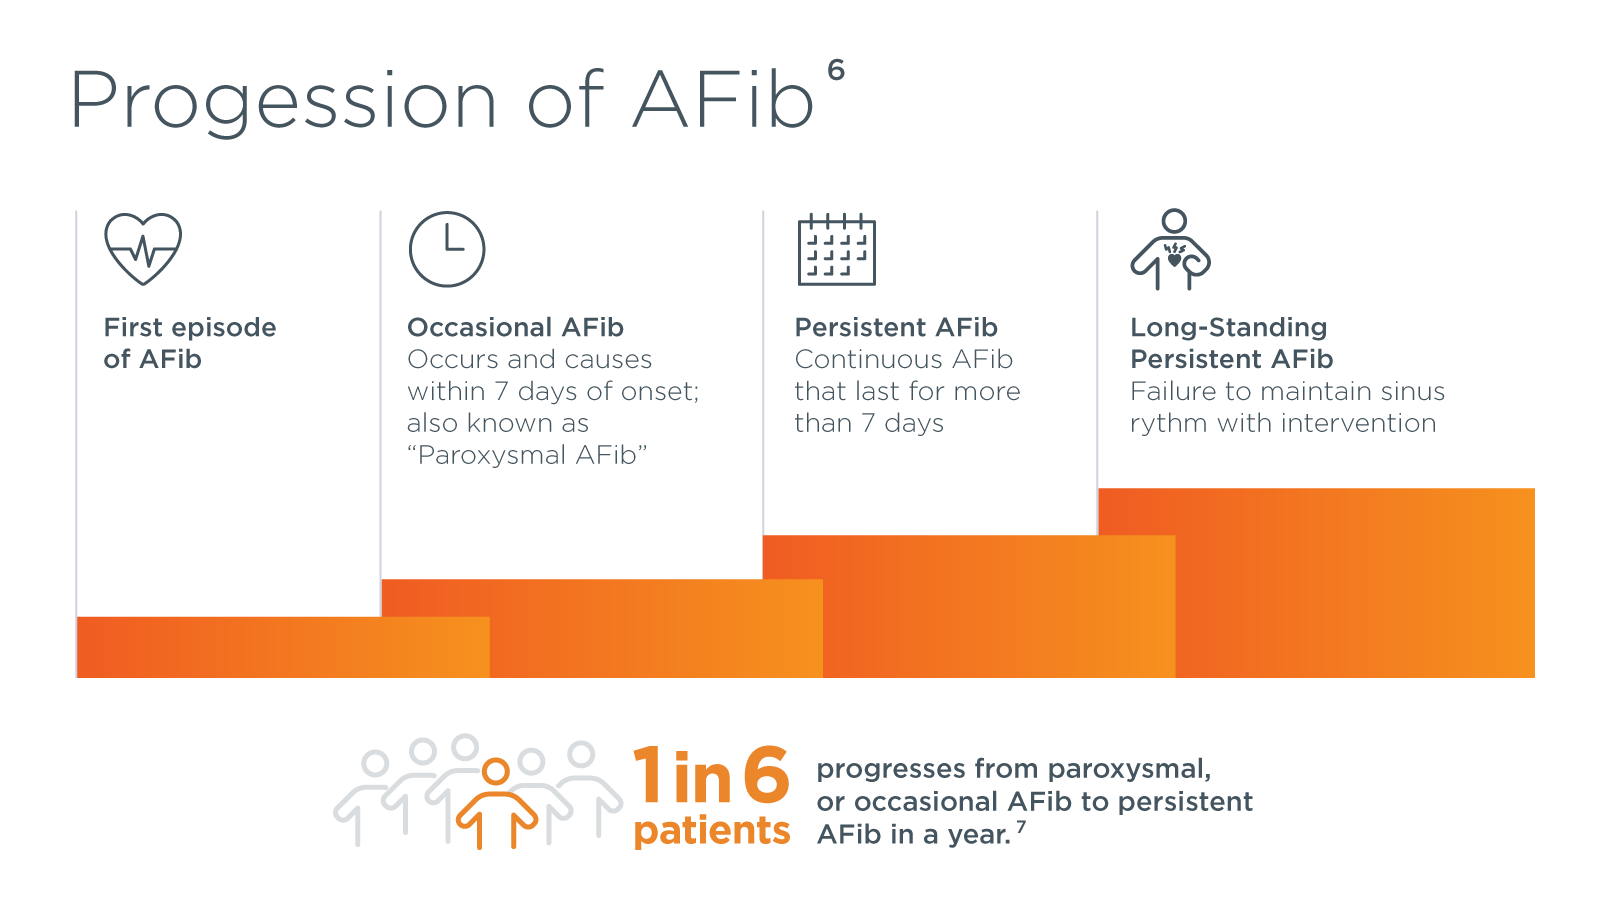 AFib is a Progressive Disease Infographic:  What are the different types of AFib? The Heart Rhythm Society defines AFib by the duration of the AFib episode. The longer one is consistently in AFib, the further along AFib is on the progression scale. The infographic shows the progression of Paroxysmal AFib or Occasional AFib, Persistent AFib, and Long-Standing Persistent AFib.